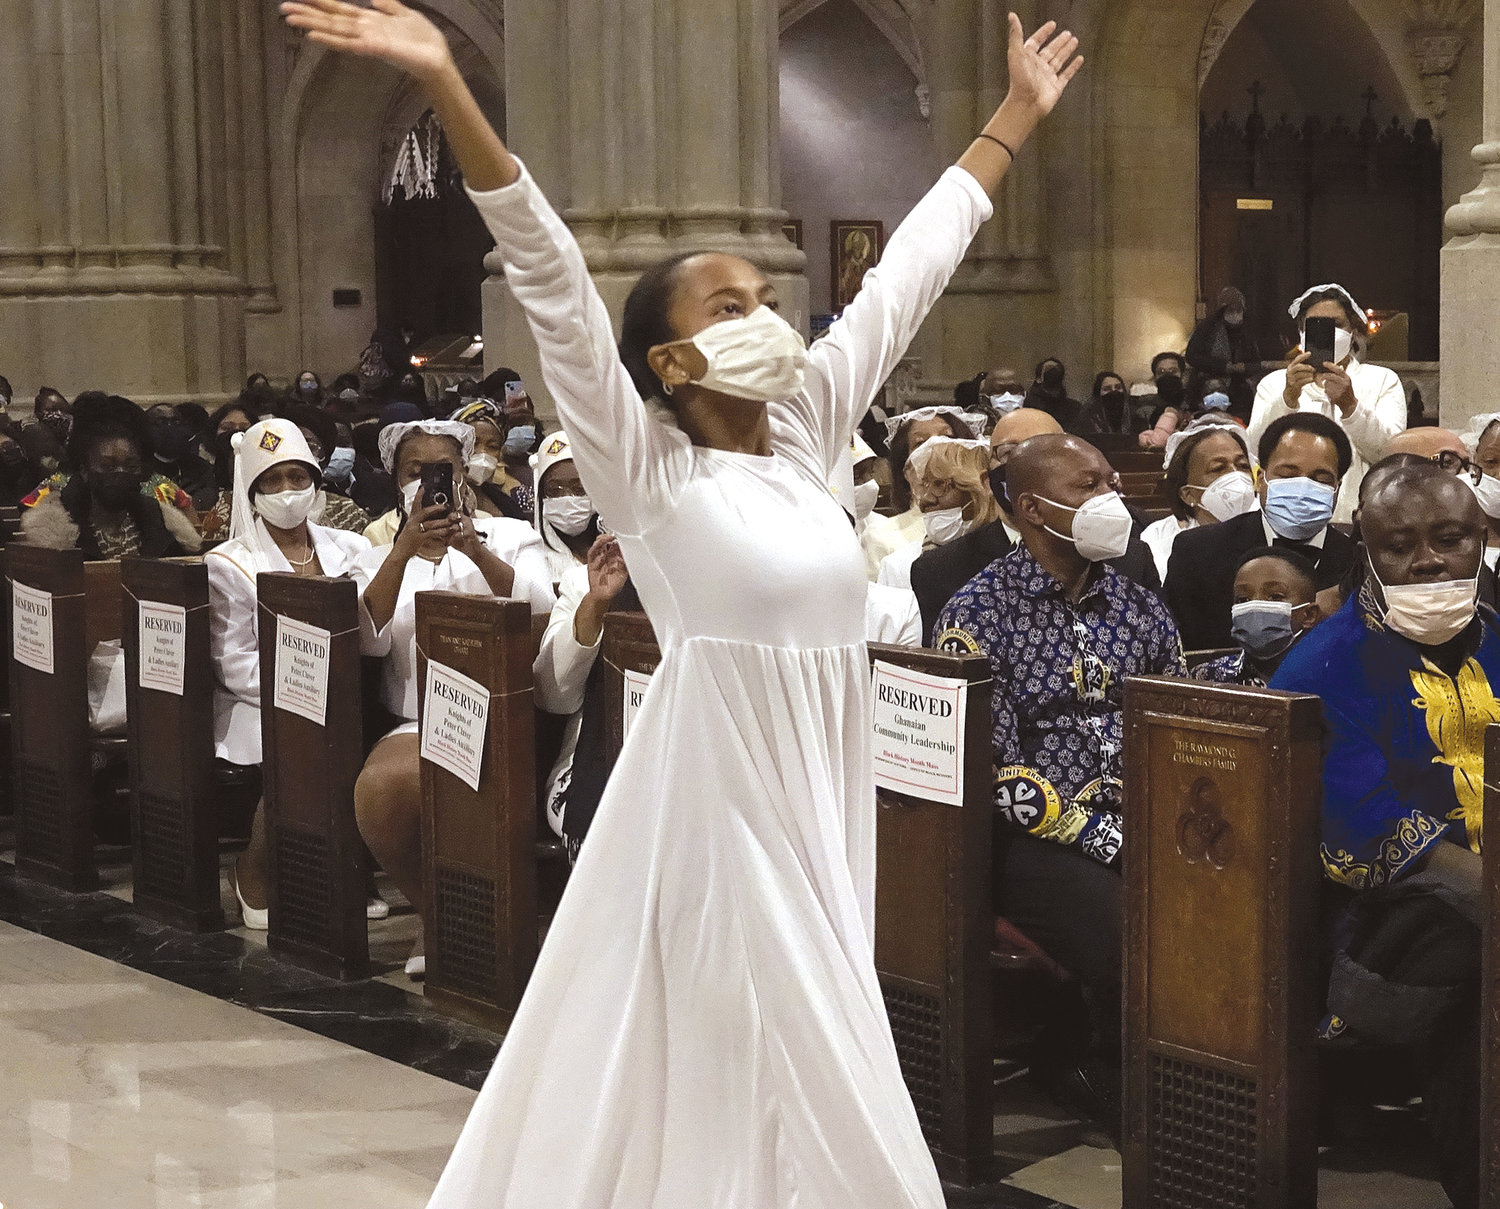 Nevaeh Blake, 14, ministers in dance during the annual Black History Month Mass at St. Patrick’s Cathedral Feb. 6.